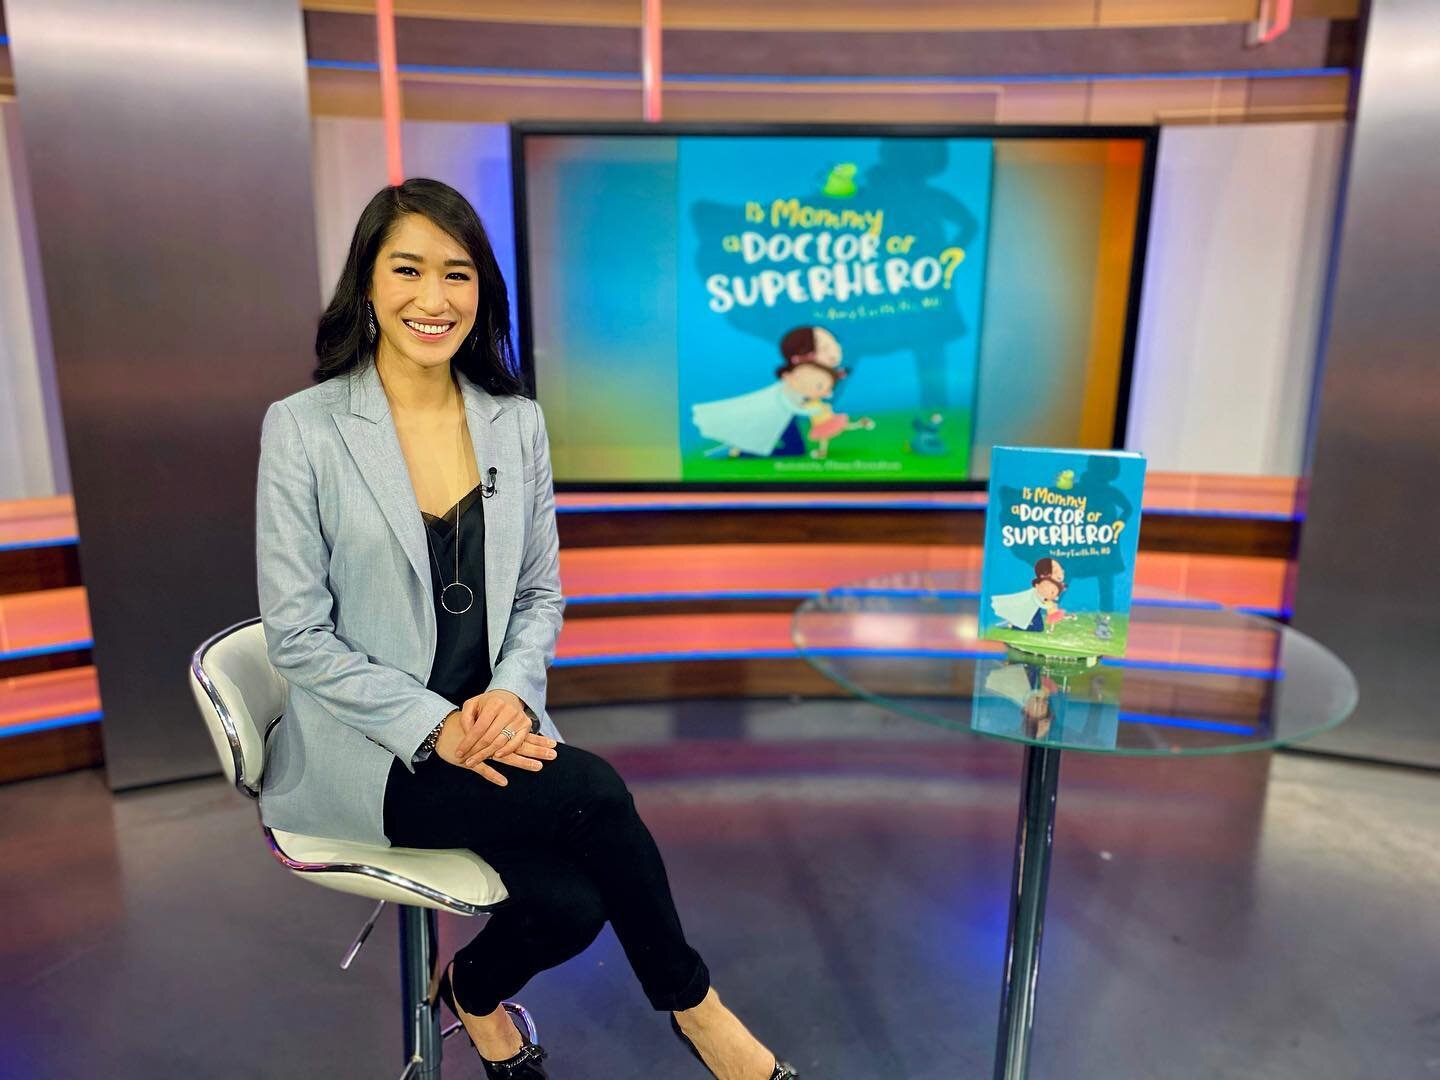 📺 Tune into @nbctexastoday on @nbcdfw channel 5 TODAY at 11:30am CT to see a familiar face @amyfaithho🤪 and a familiar book📚@doctormommybook❗️ Special thanks to @nbcdfw @viviankwarm @rossiramirez_ for the segment! 🎞
.
.
.
#doctor #mommy #nbc #dal